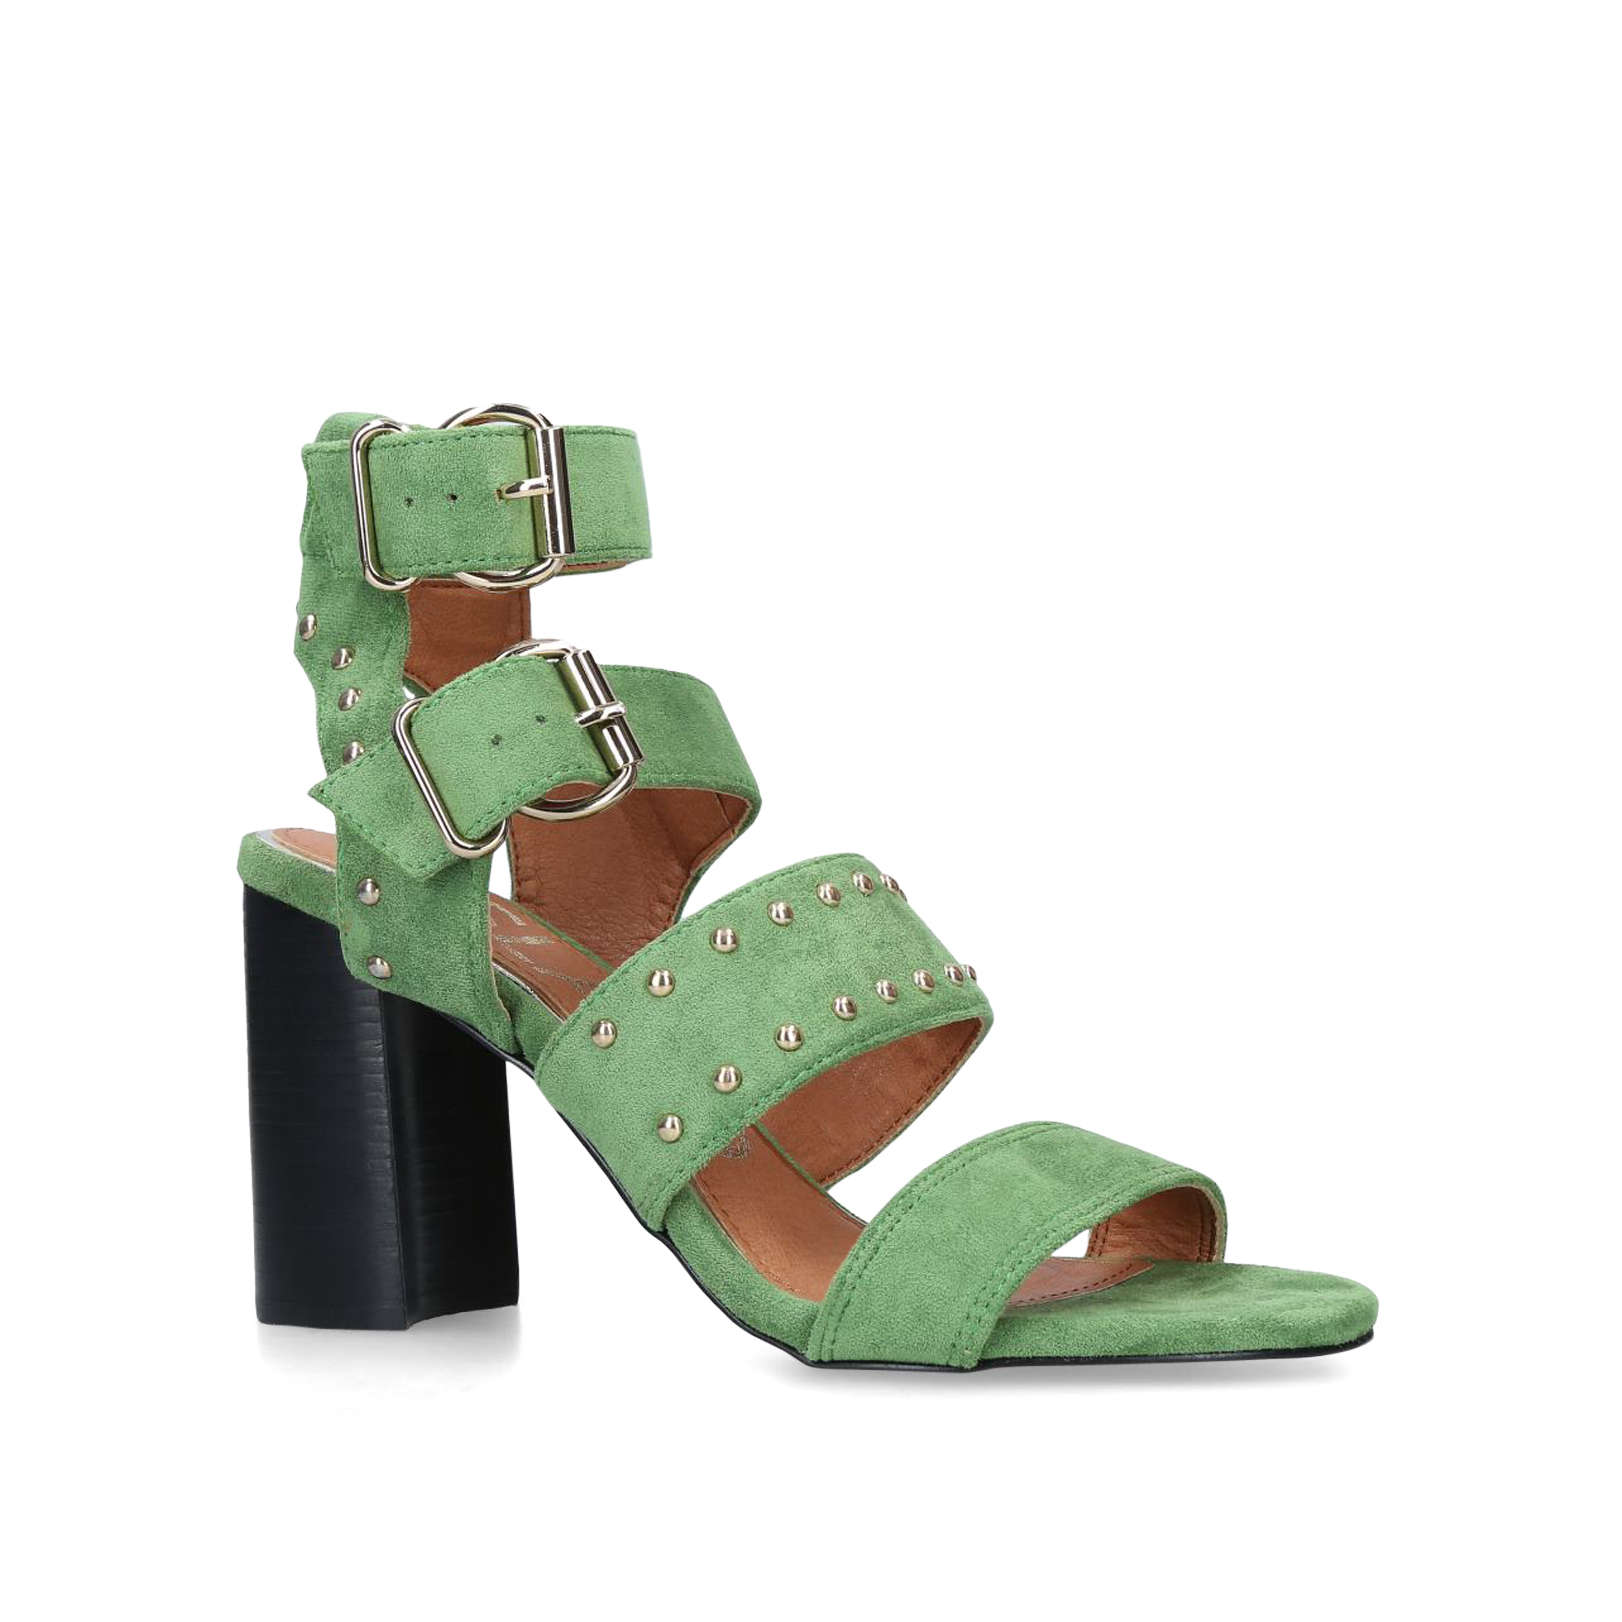 river island green sandals review 450bc 